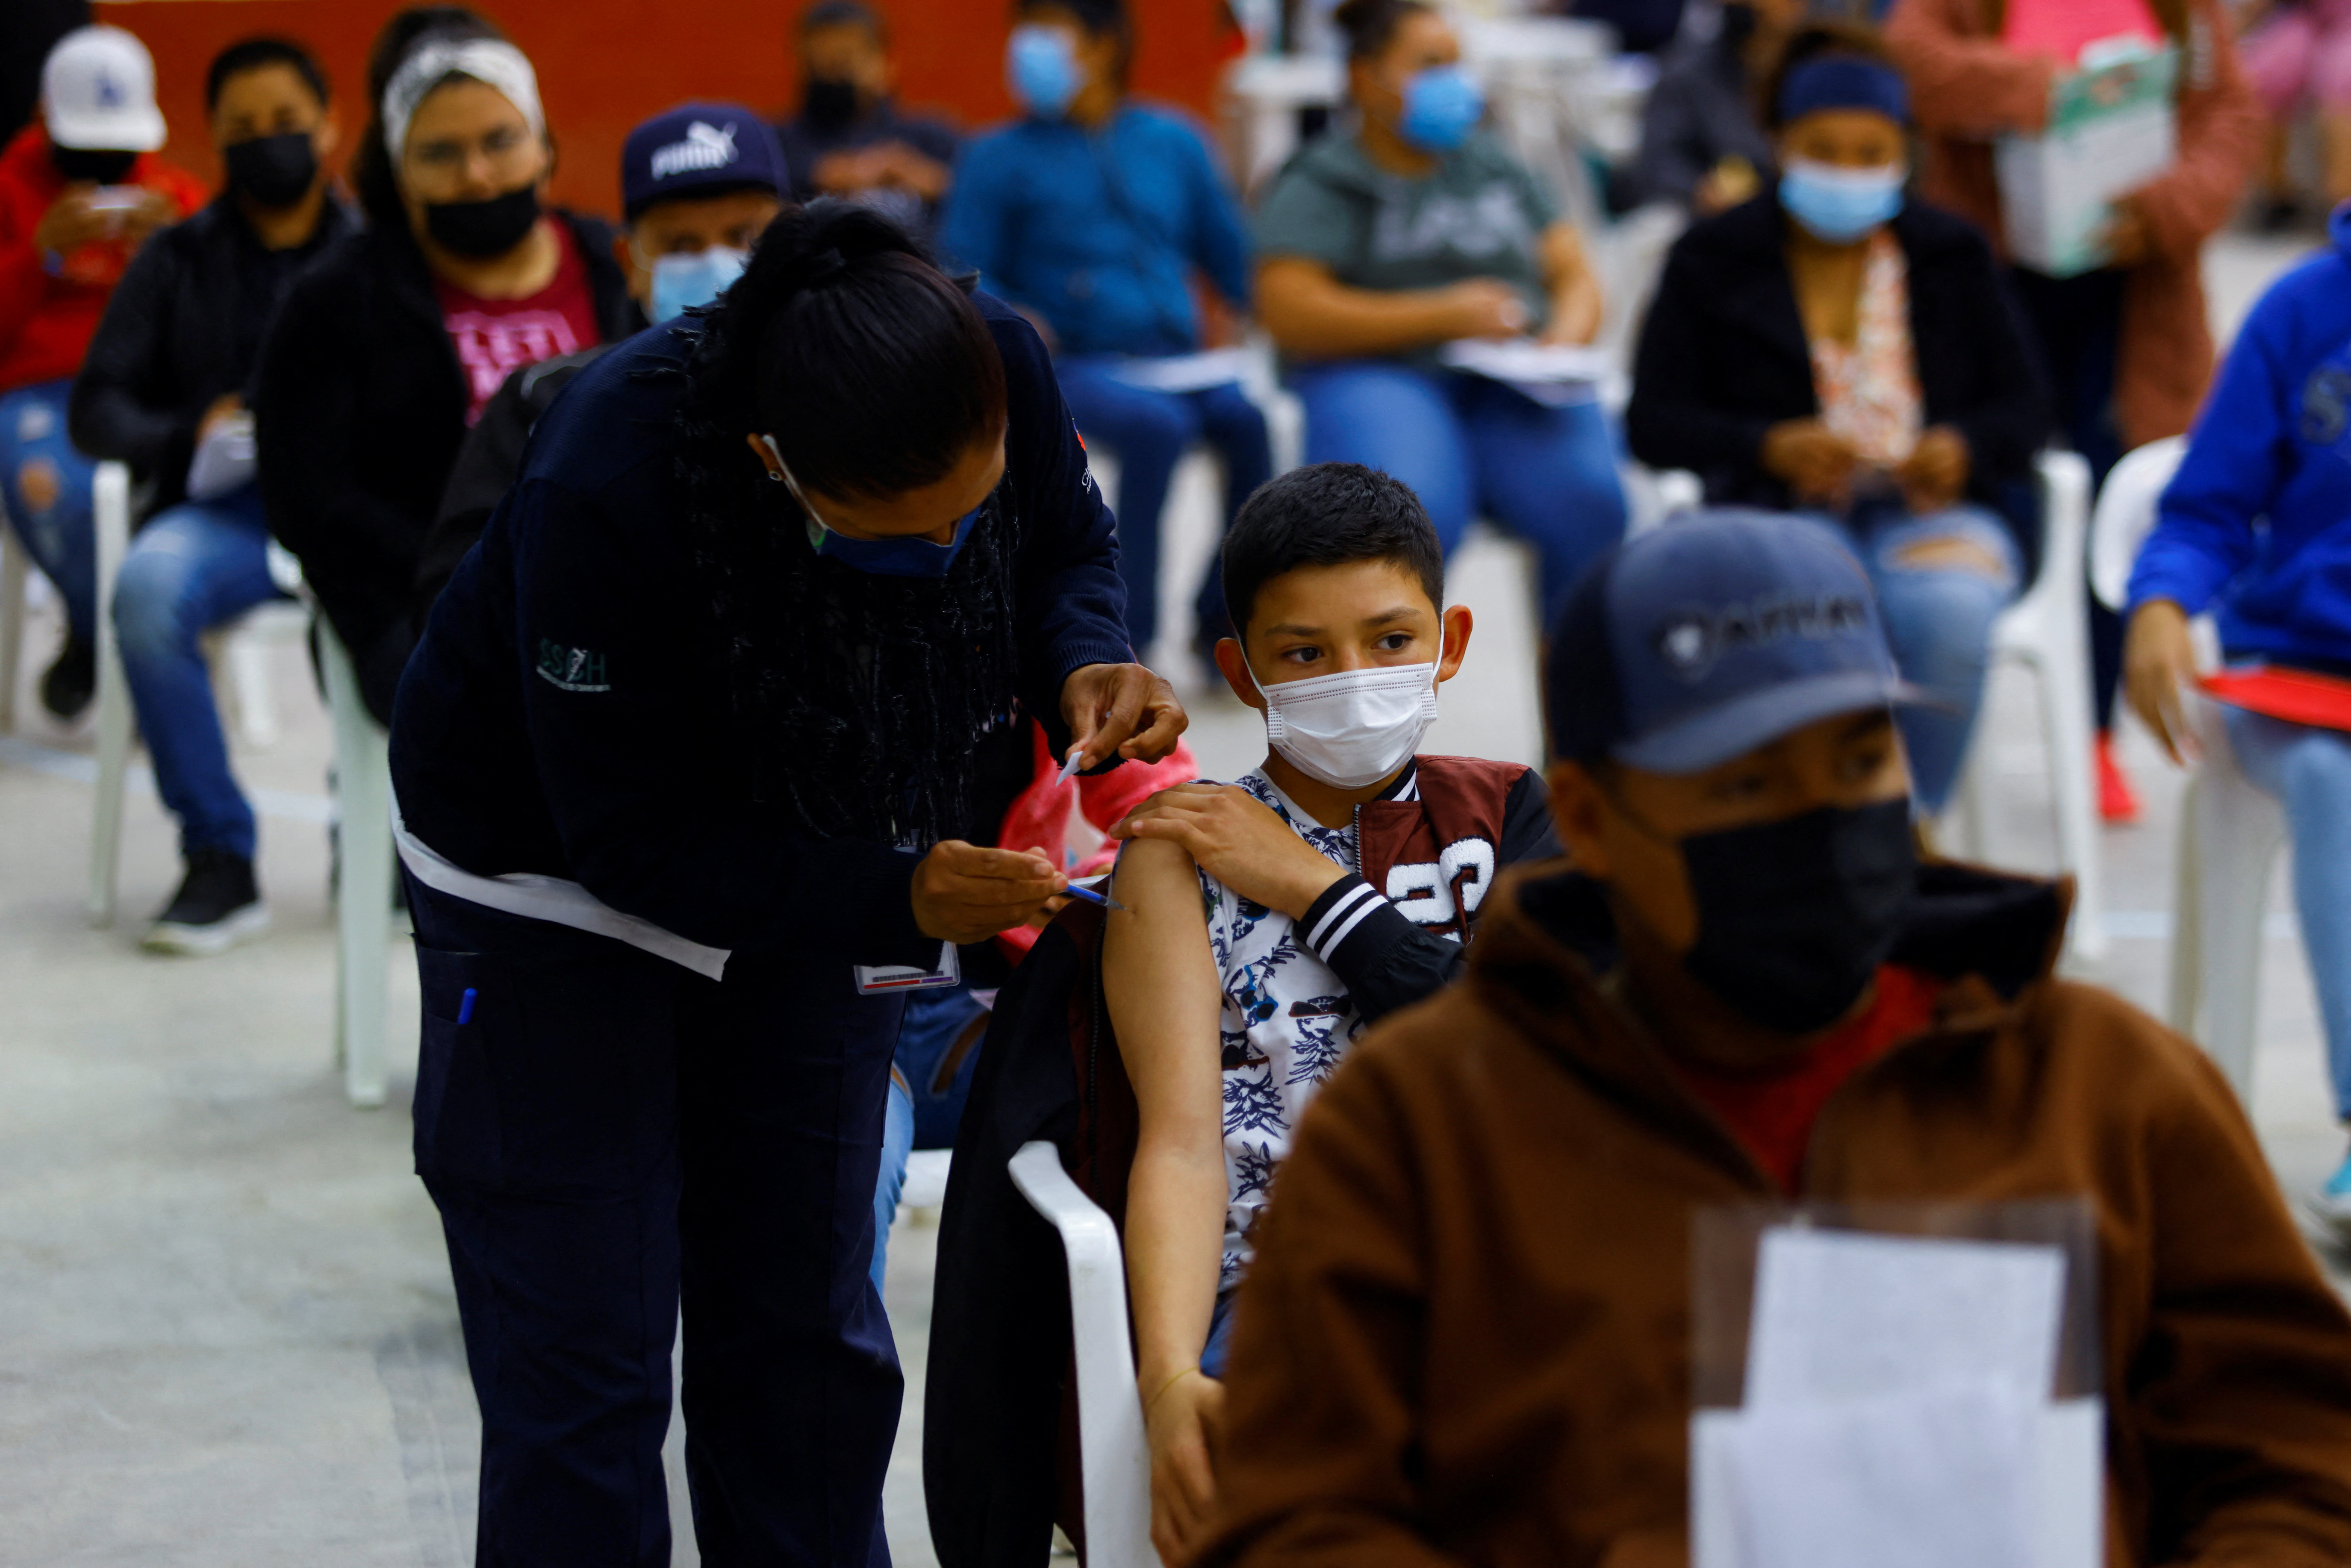 How many children could receive the Covid-19 vaccine in Mexico